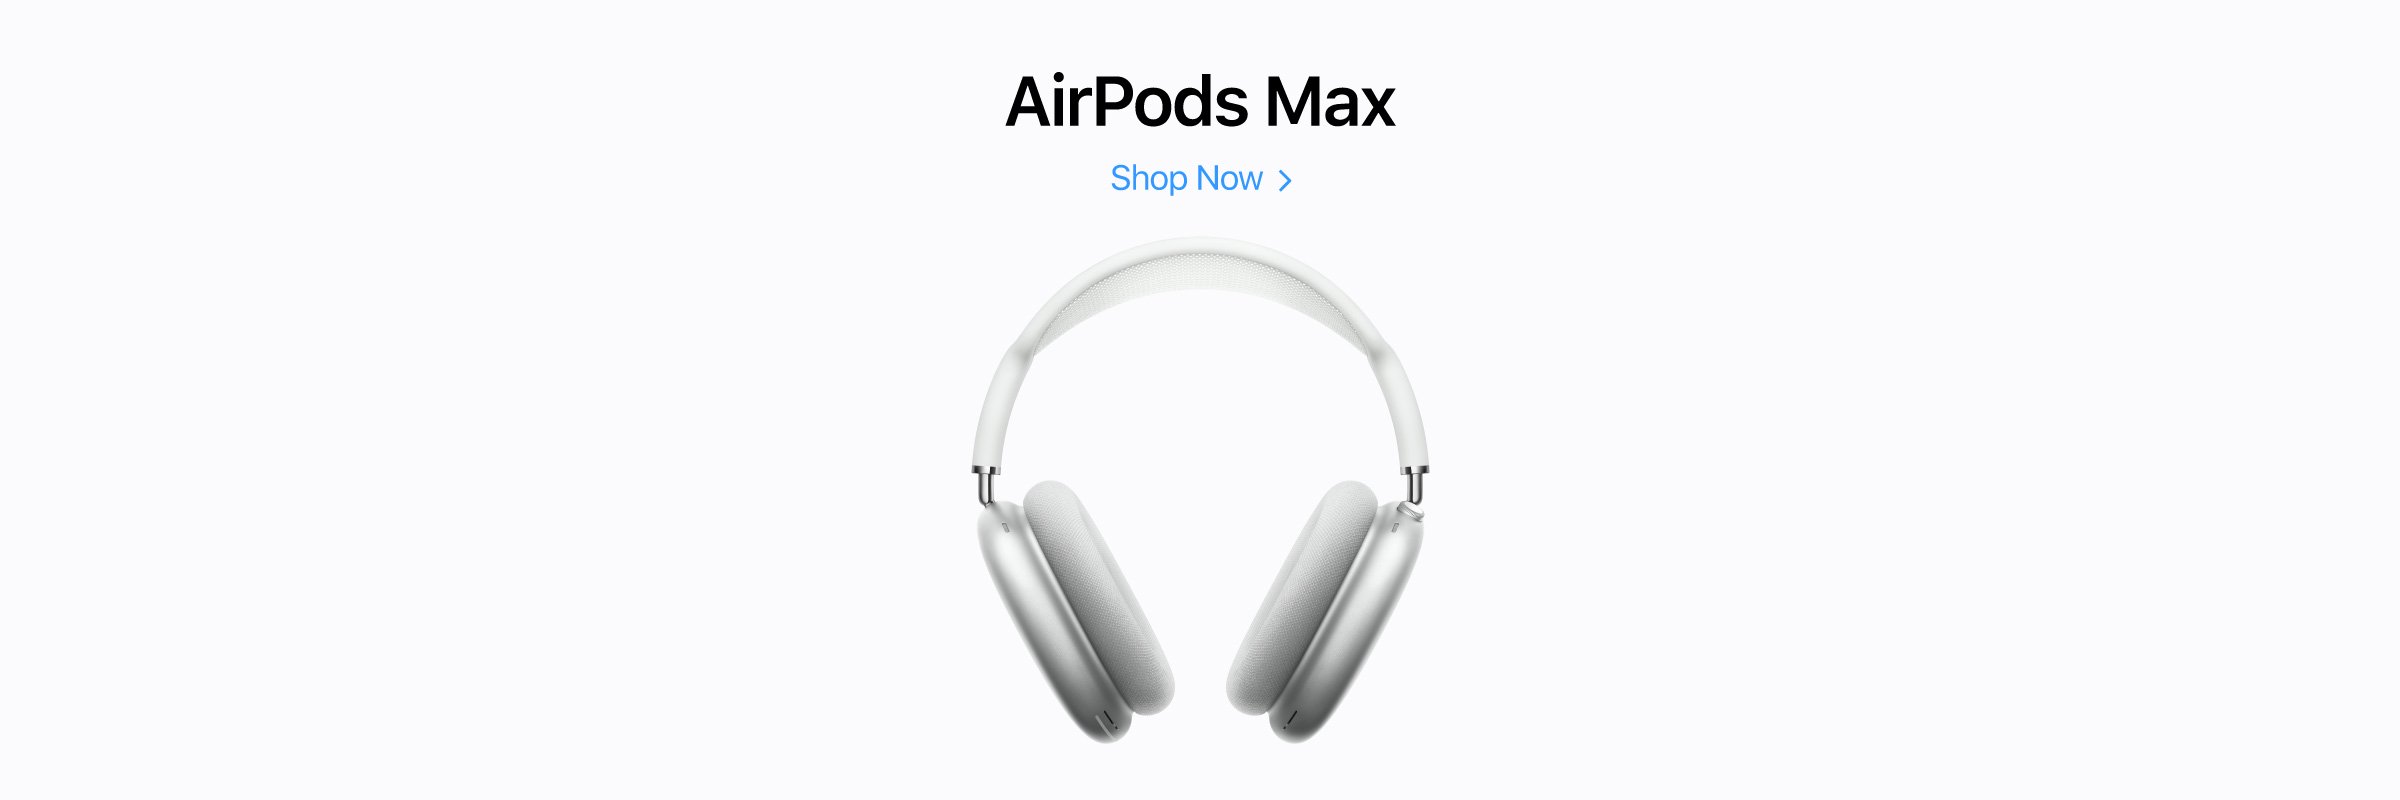 Shop Now: AirPods Max